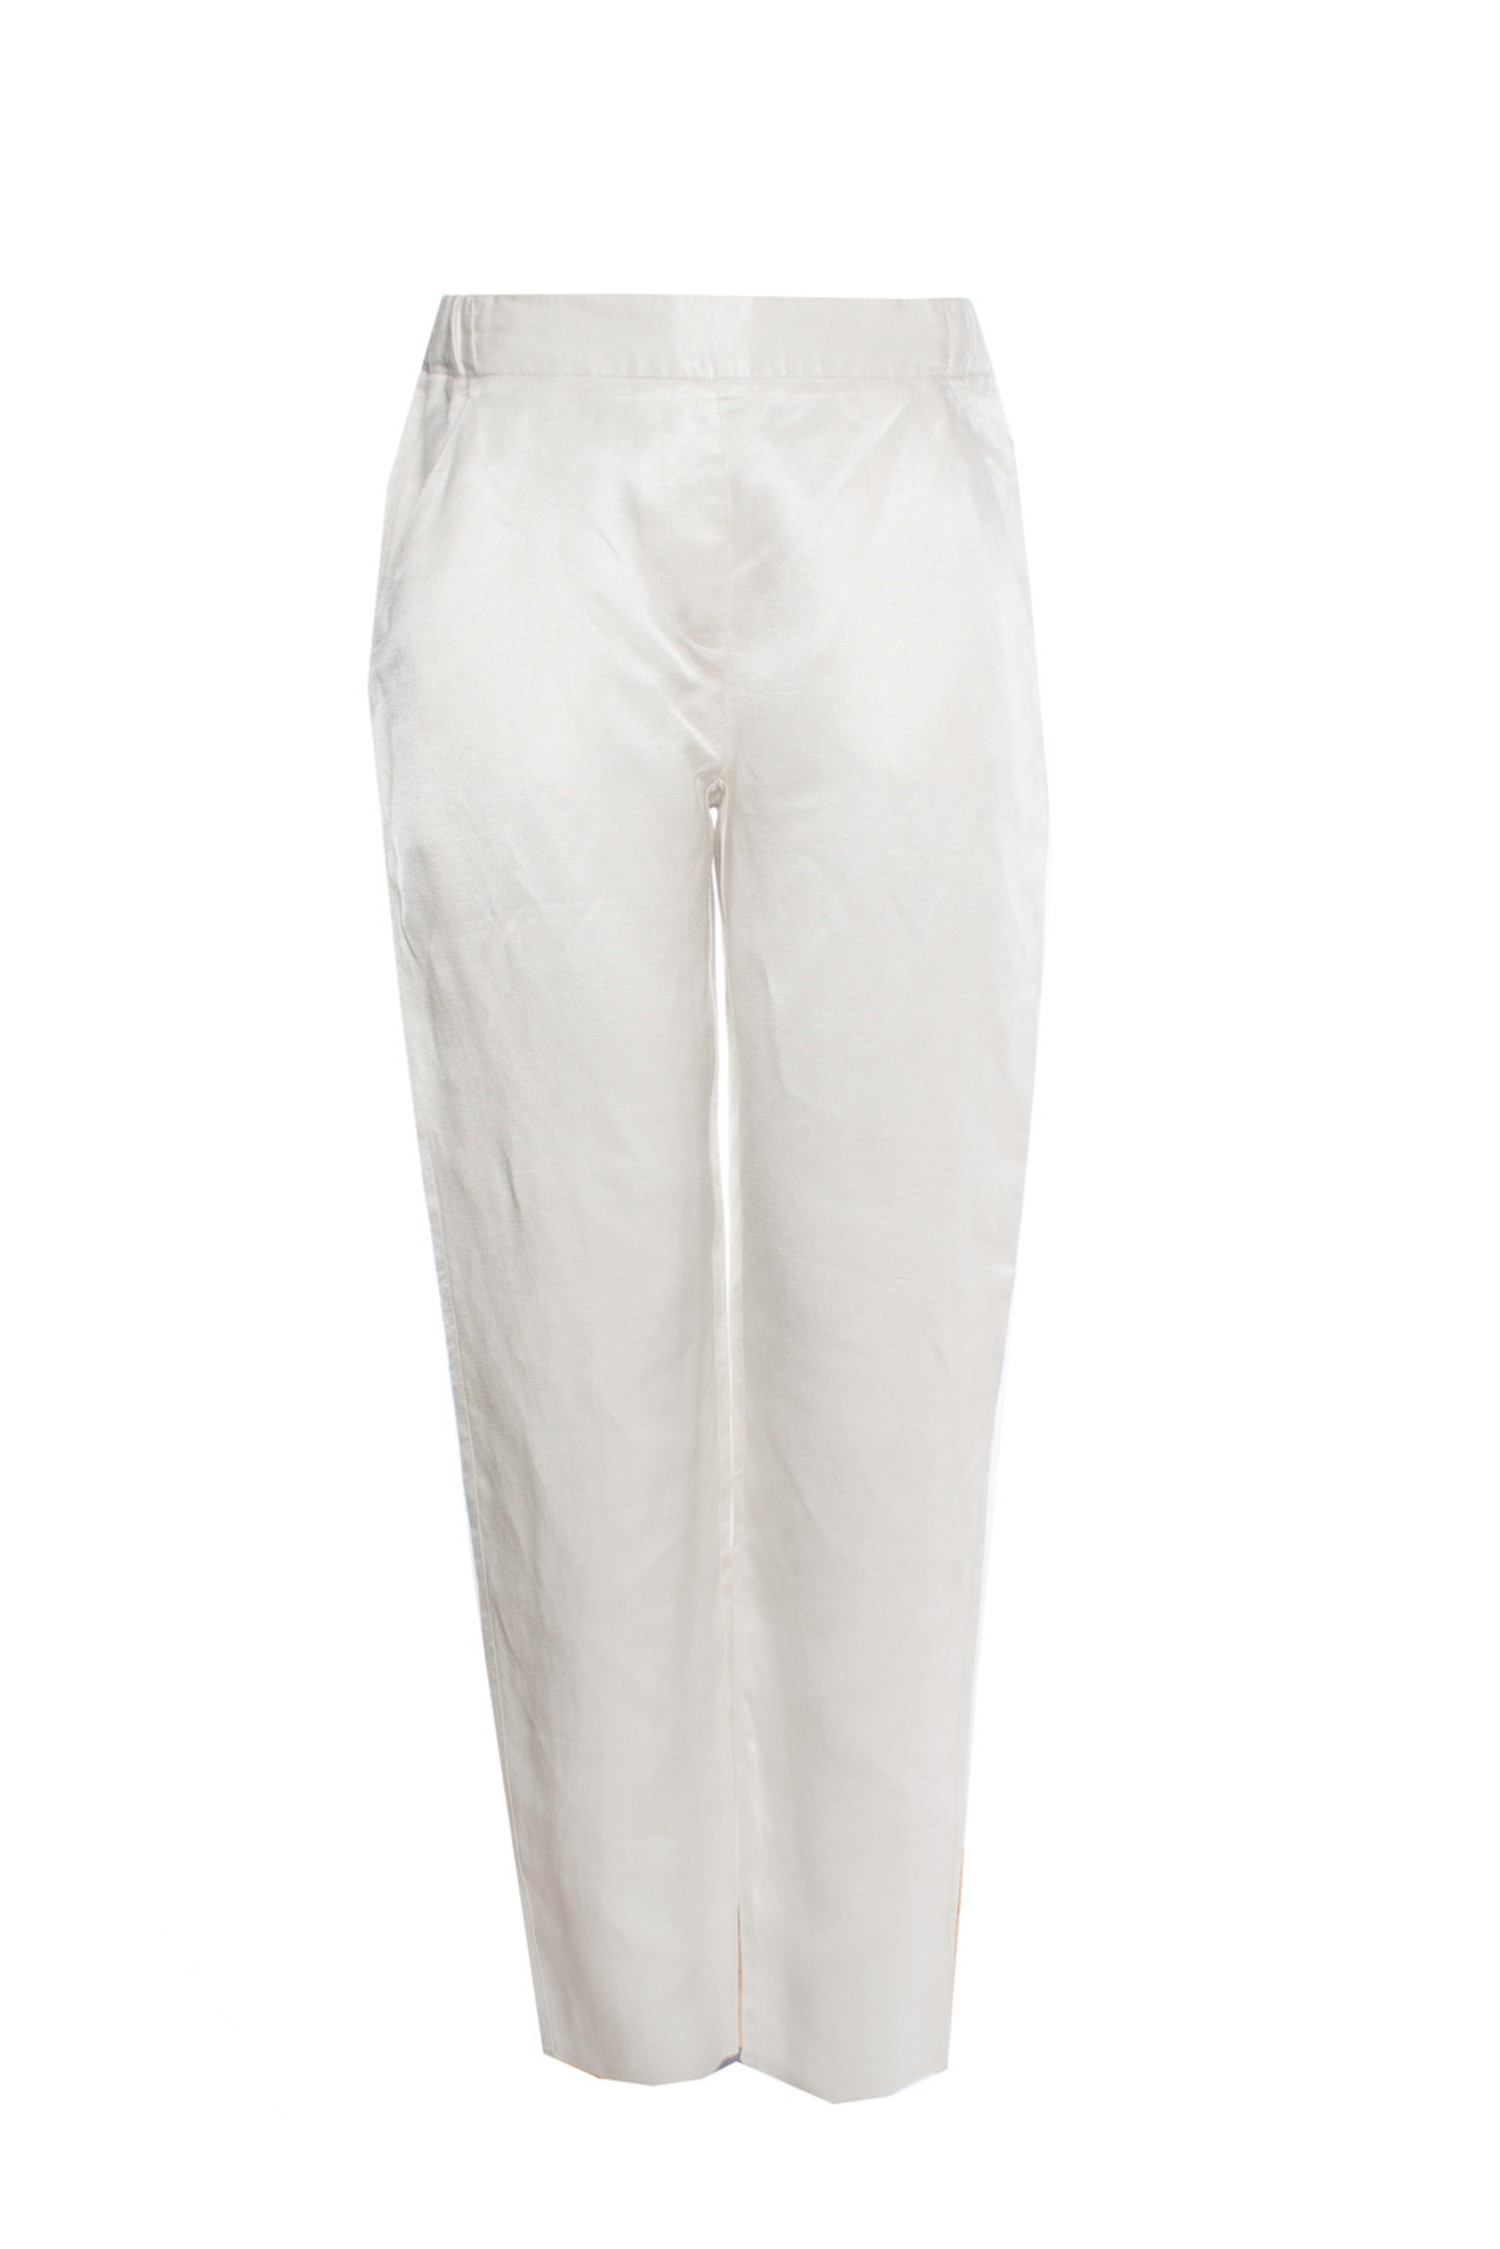 Jeans & Trousers | Designer White Jaggins | Freeup